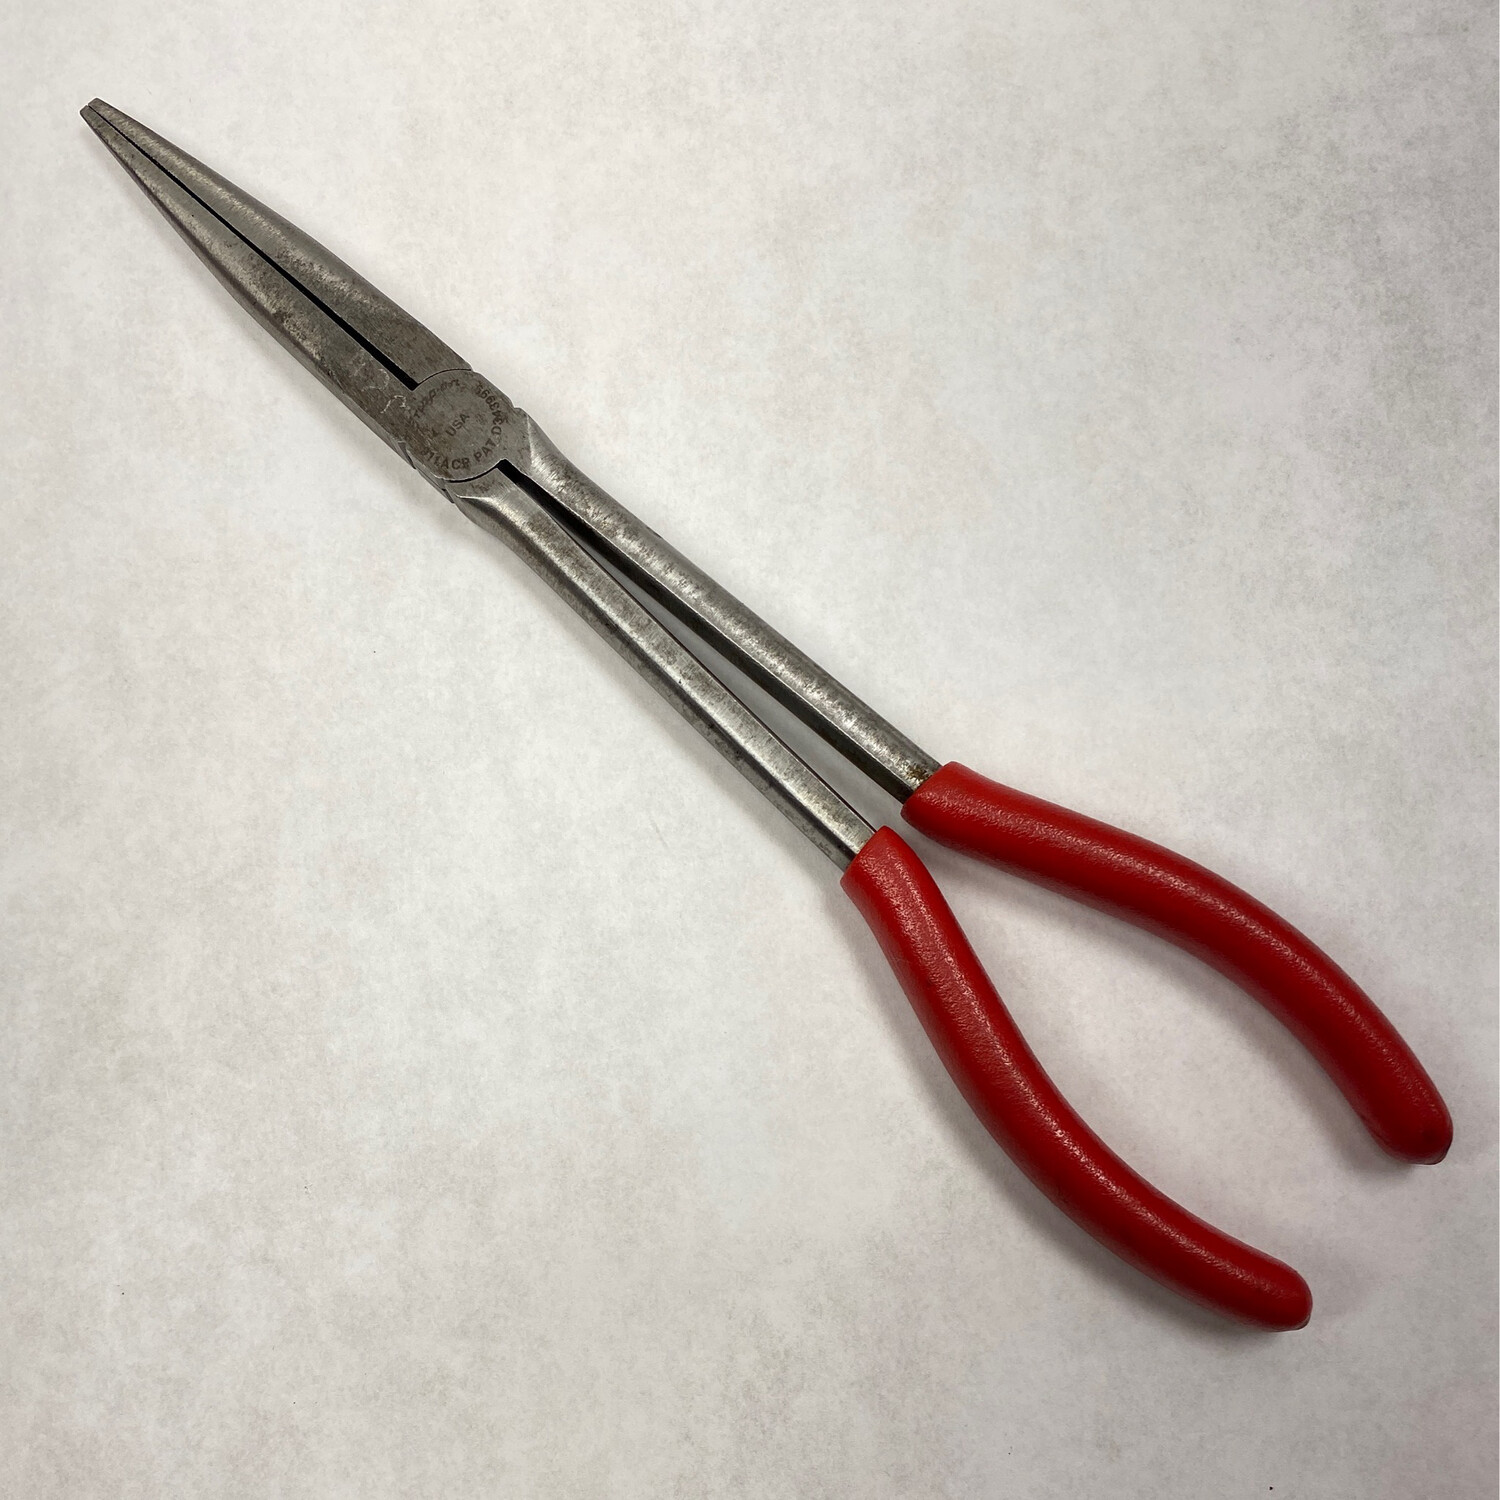 Snap On 11” Long Needle Nose Pliers, 911ACP